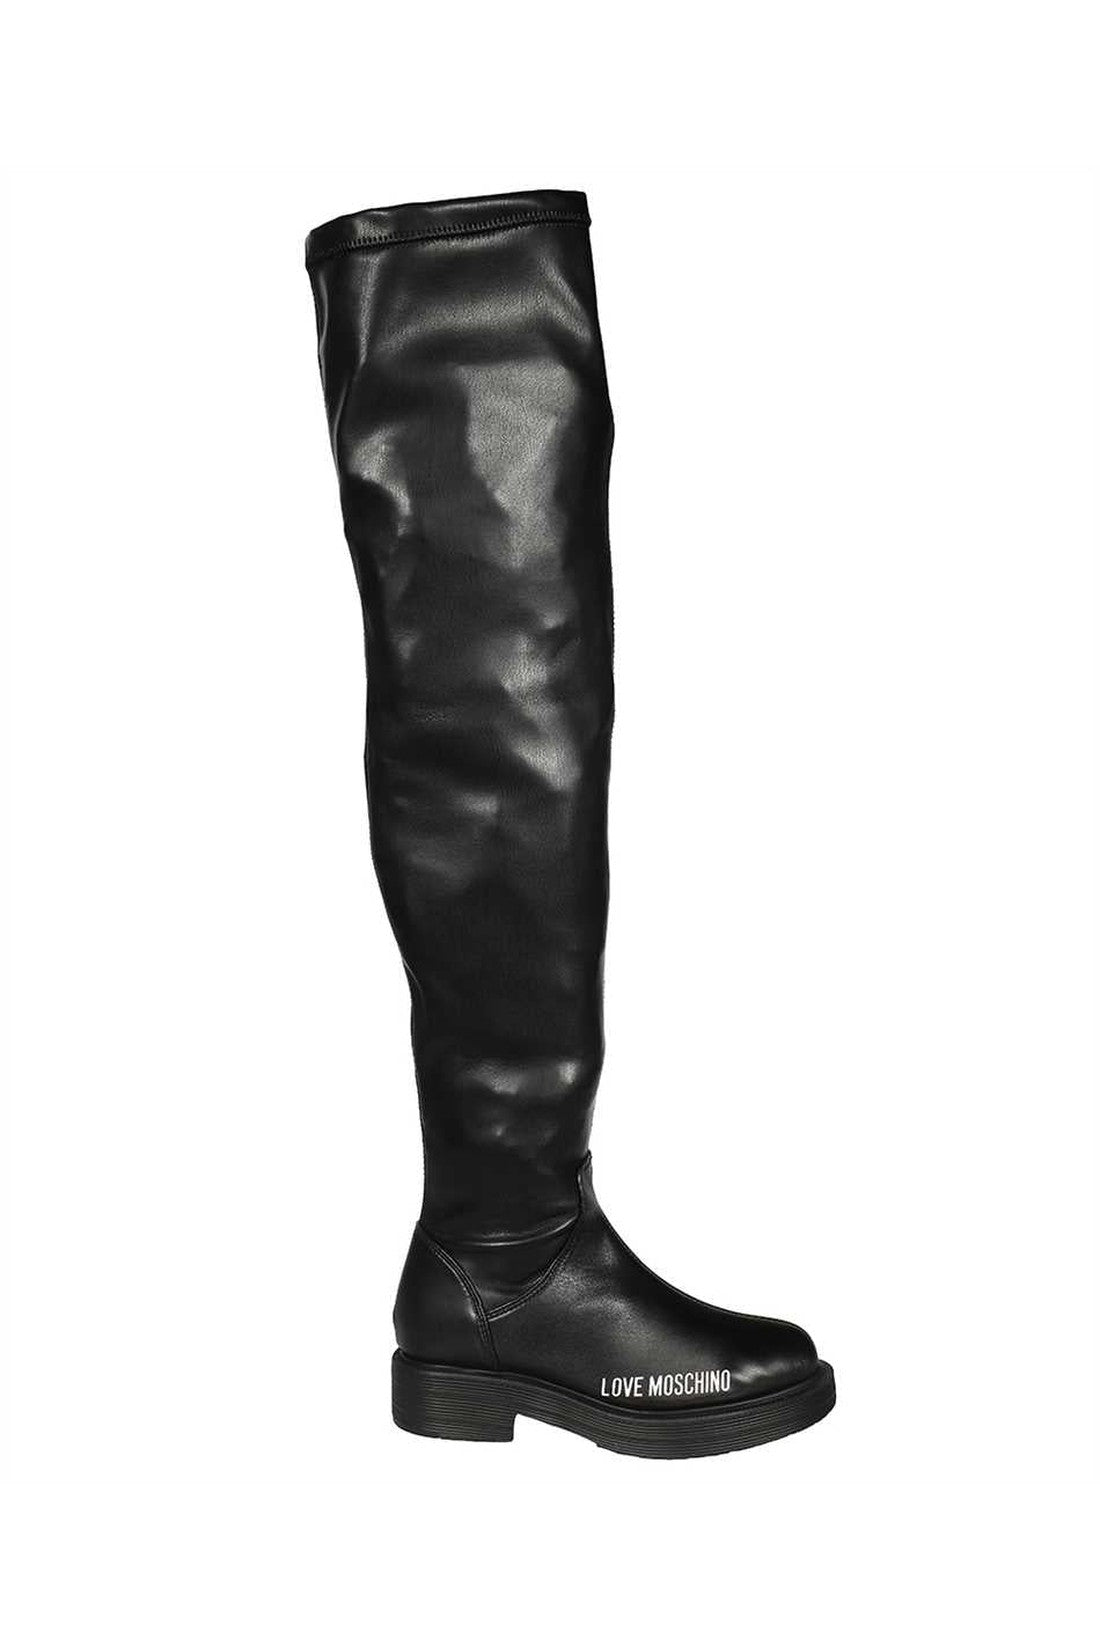 Over-the-knee boots-Love Moschino-OUTLET-SALE-36-ARCHIVIST